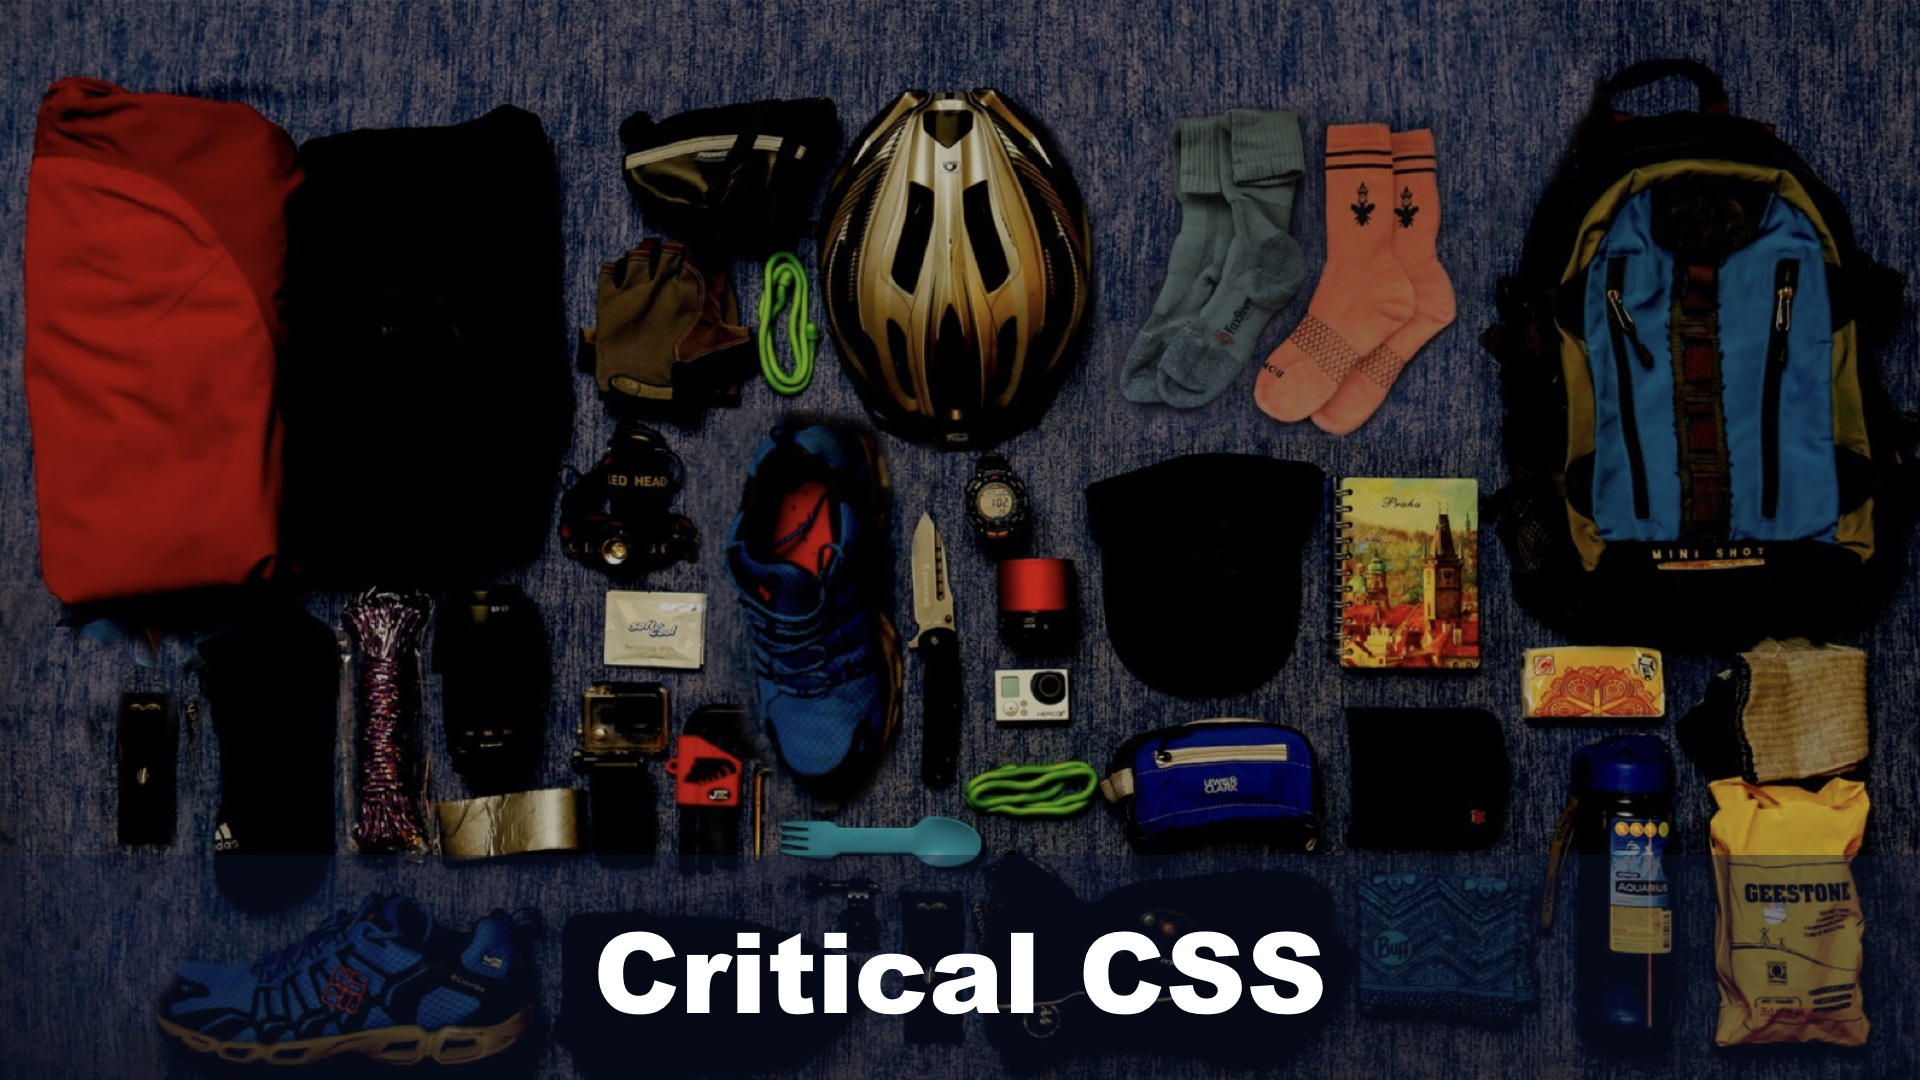 Critical CSS compared to packing for a hiking trip